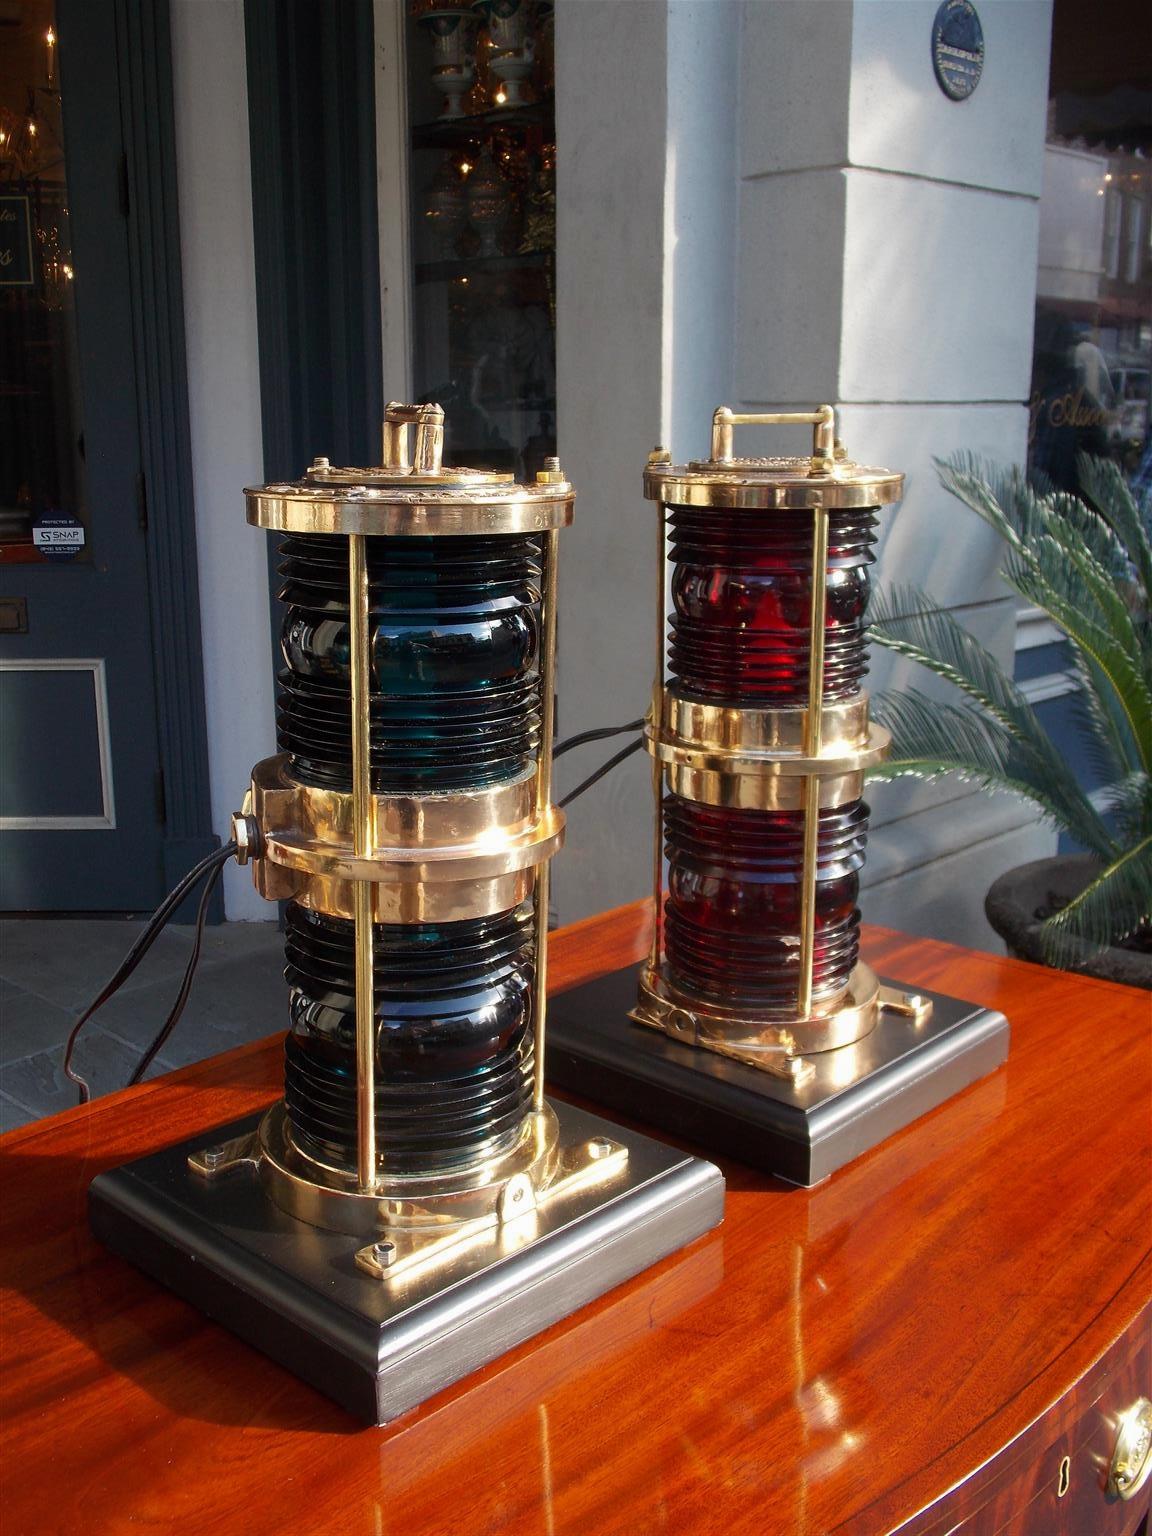 Pair of American brass double stacked maritime beacons with carrying handles, makers stamps, original red and blue 360 degree Fresnel lenses, and mounted on square bases. Manufactured by Lovell-Dressel Company of Arlington, New Jersey.  Beacons have